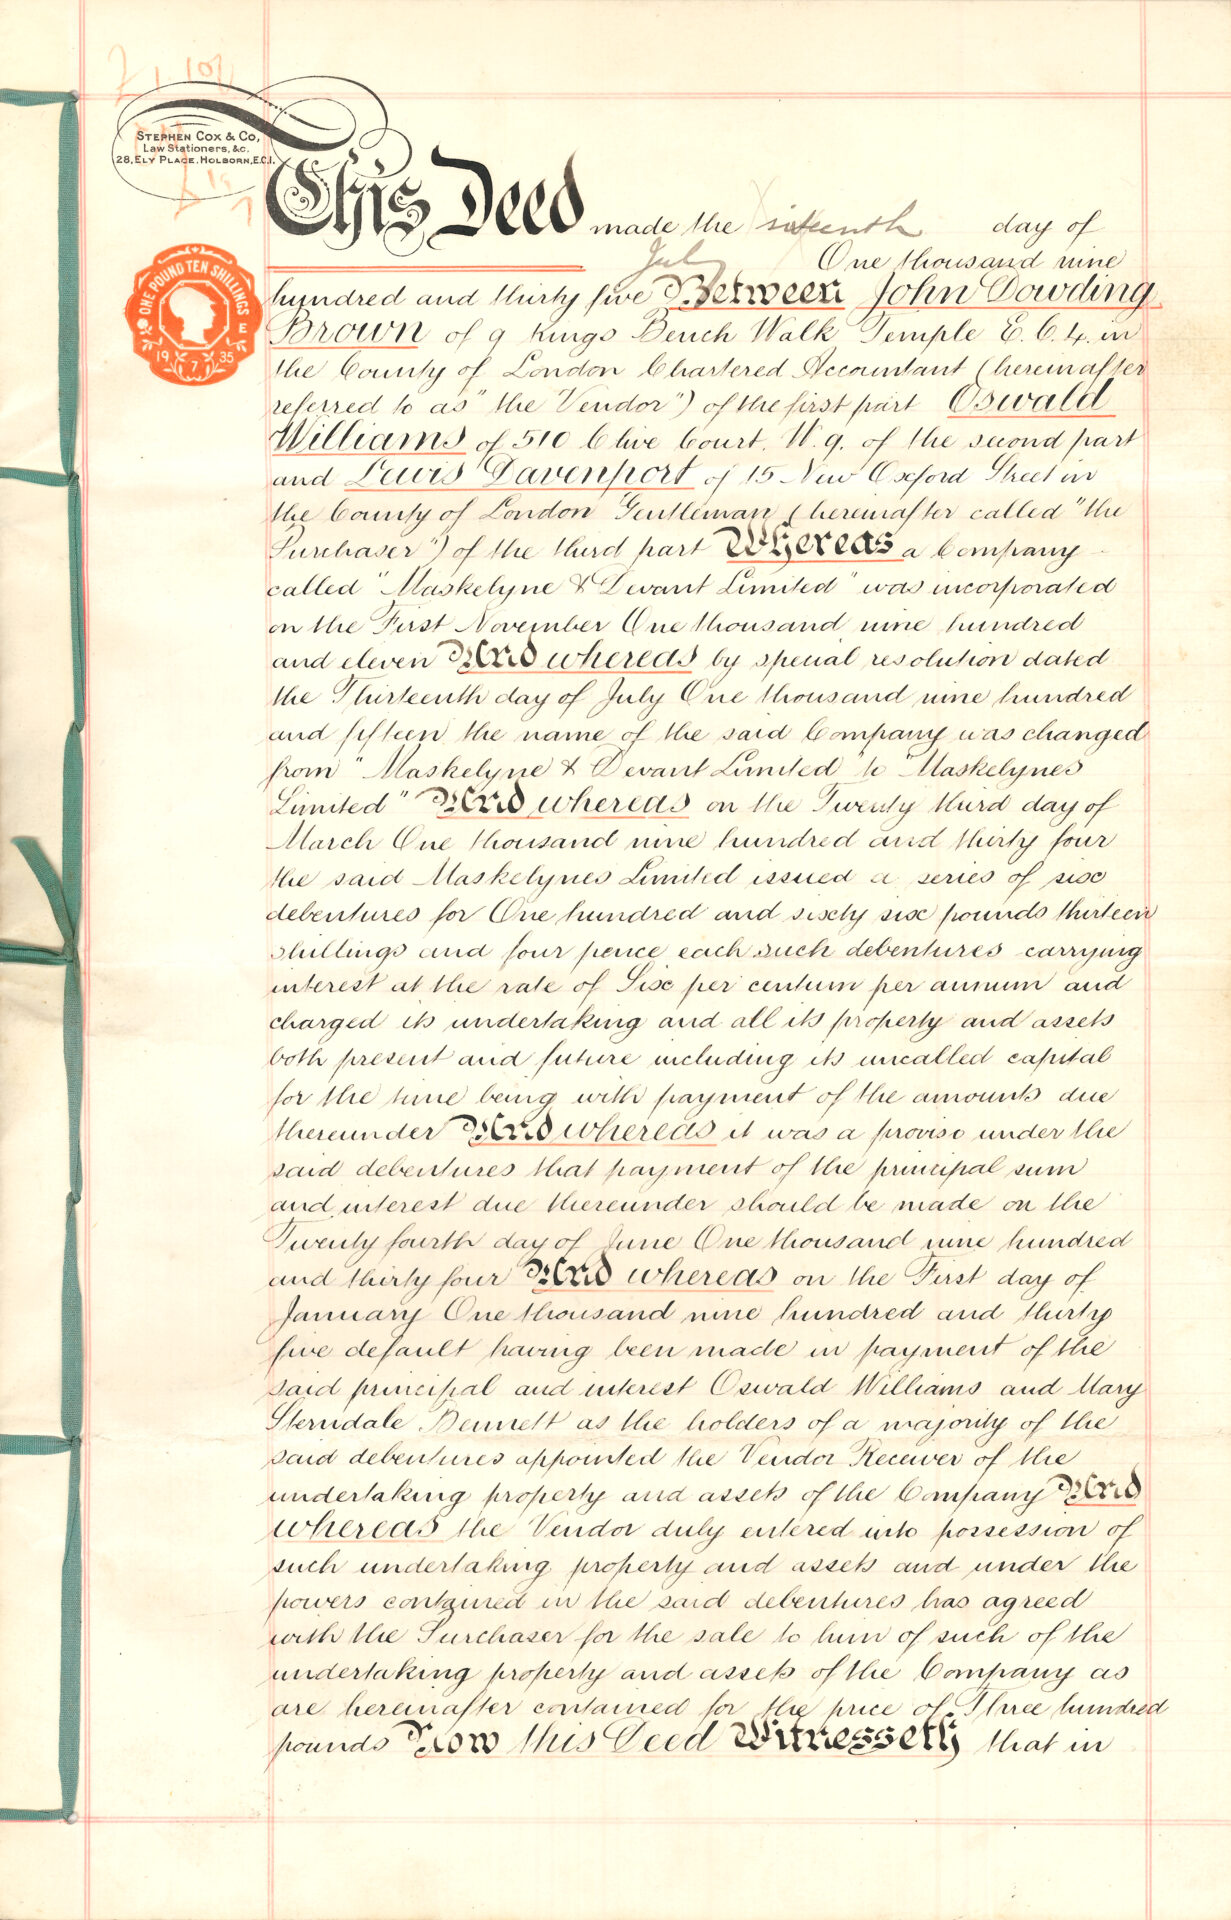 1935 agreement for sale of Maskelynes Limited to Lewis Davenport